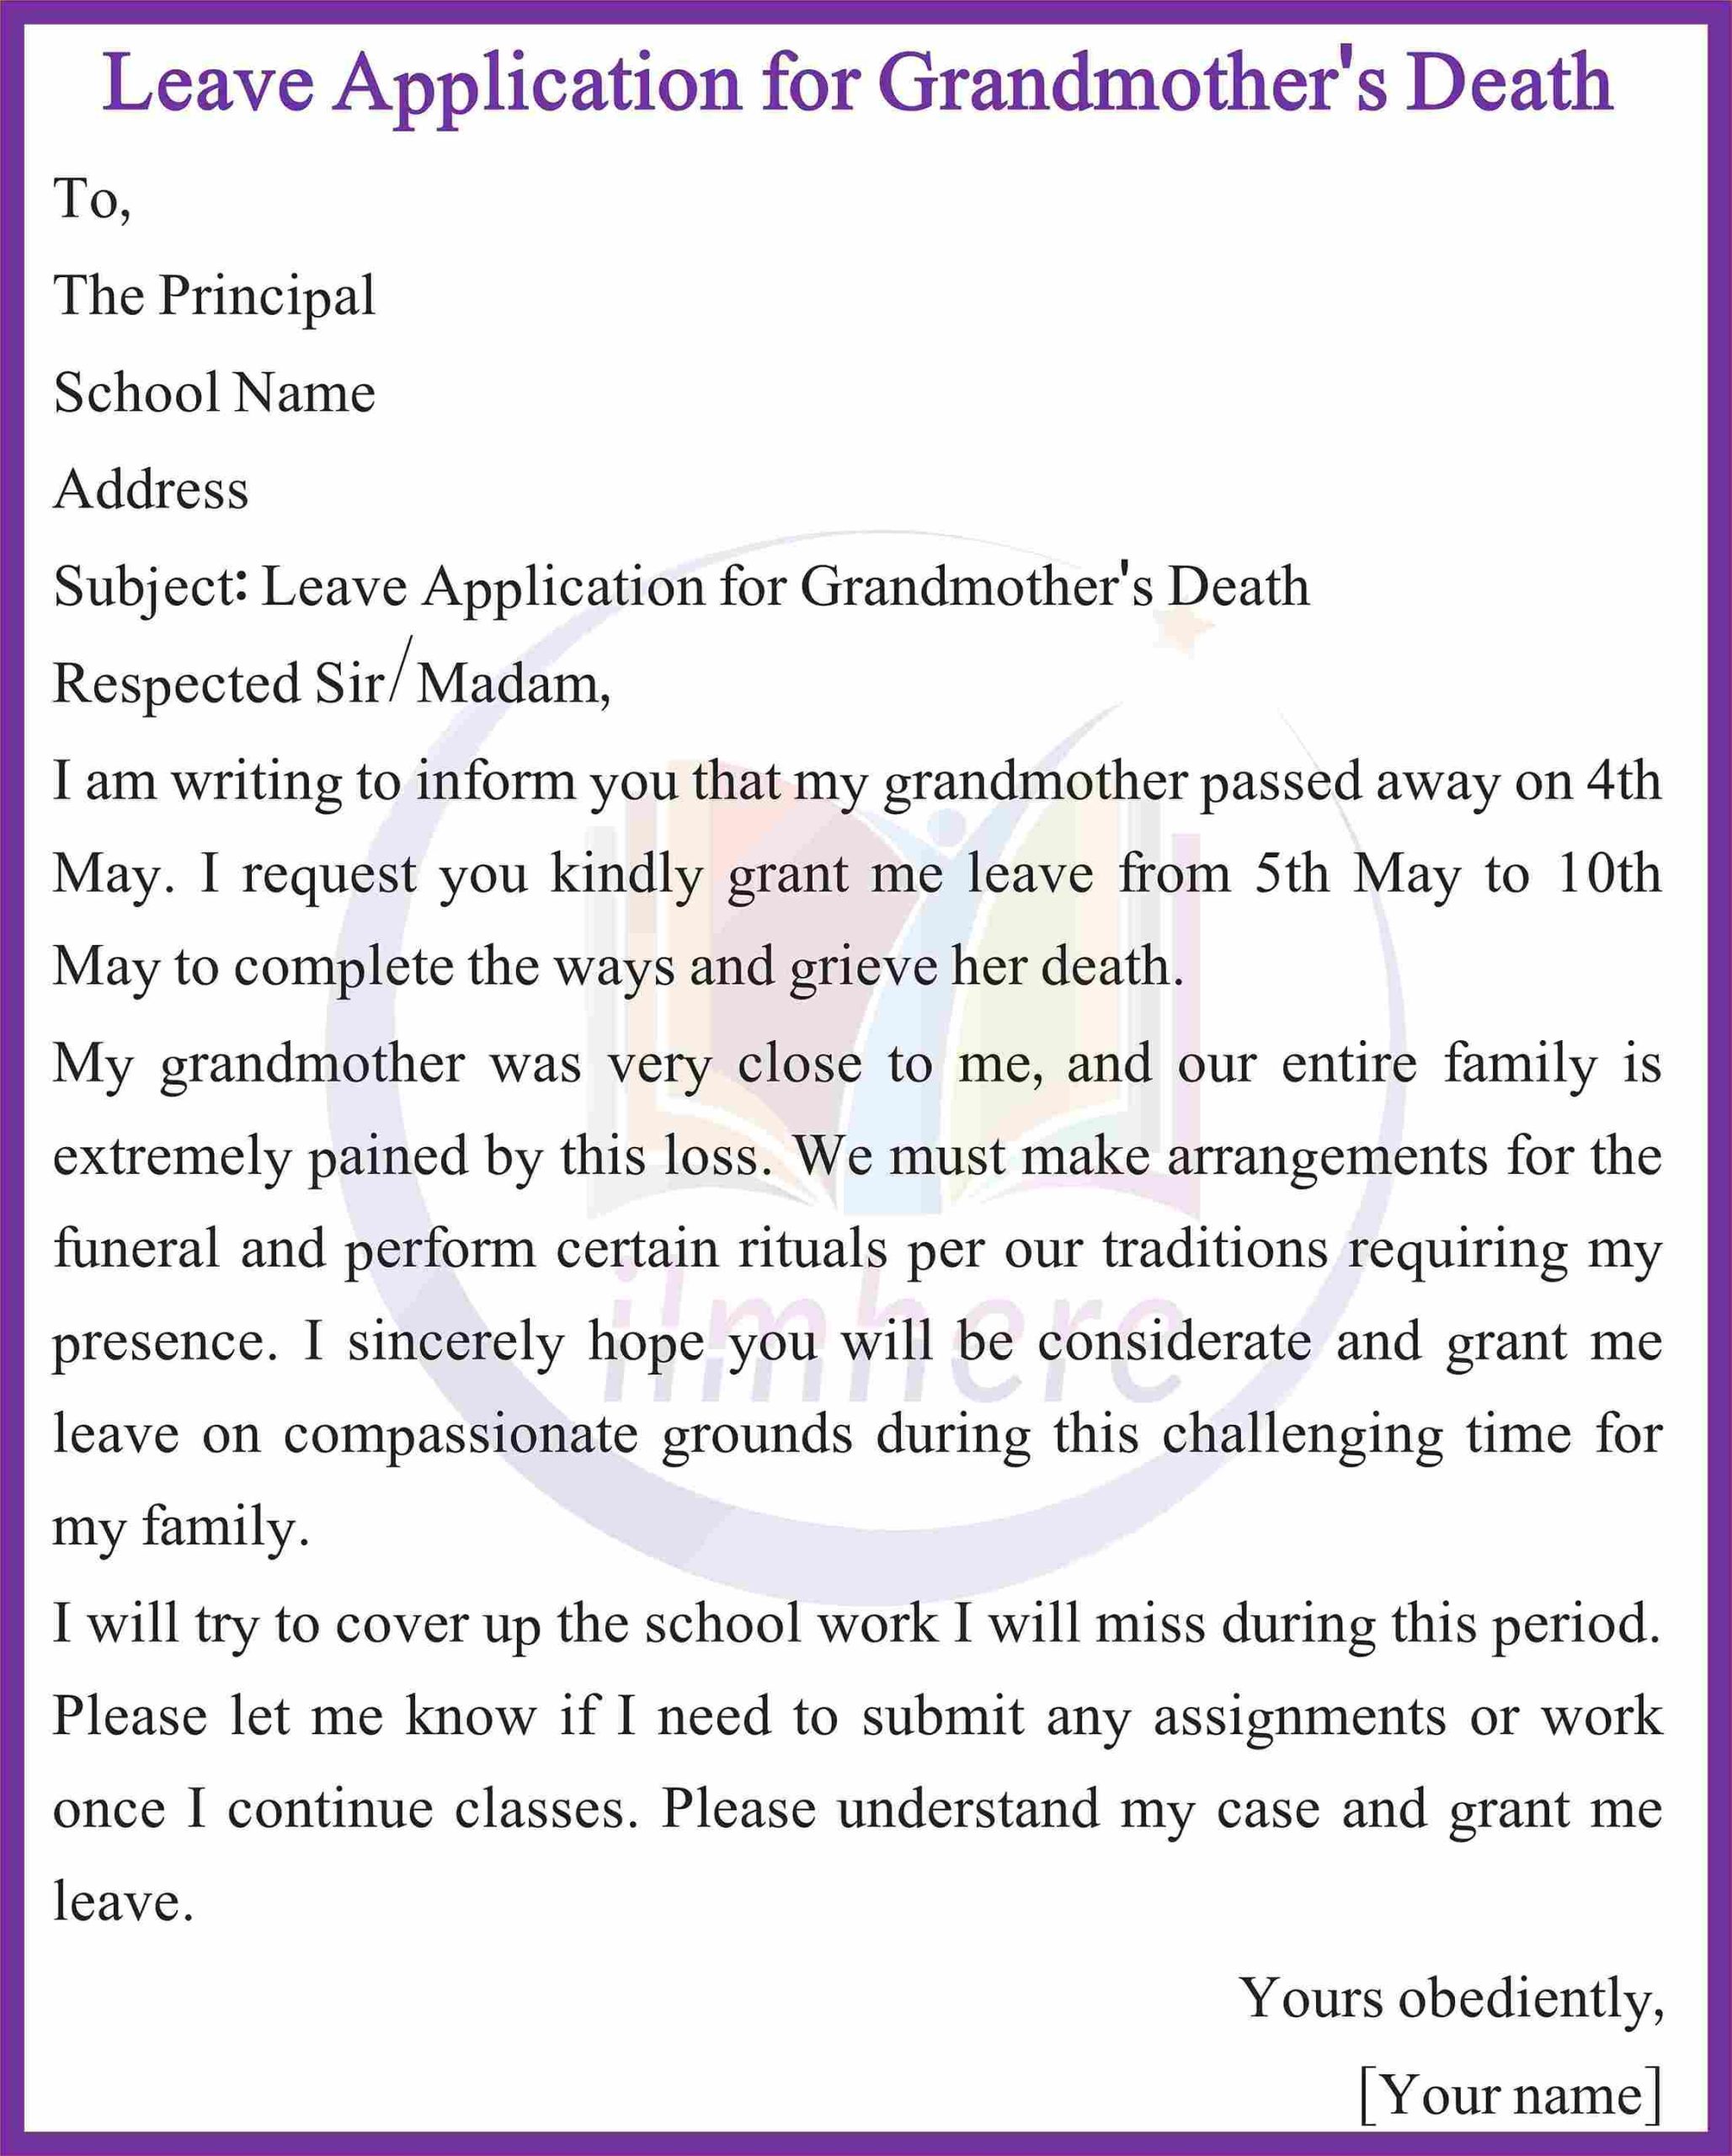 1,Leave Application for Grandmother's Death